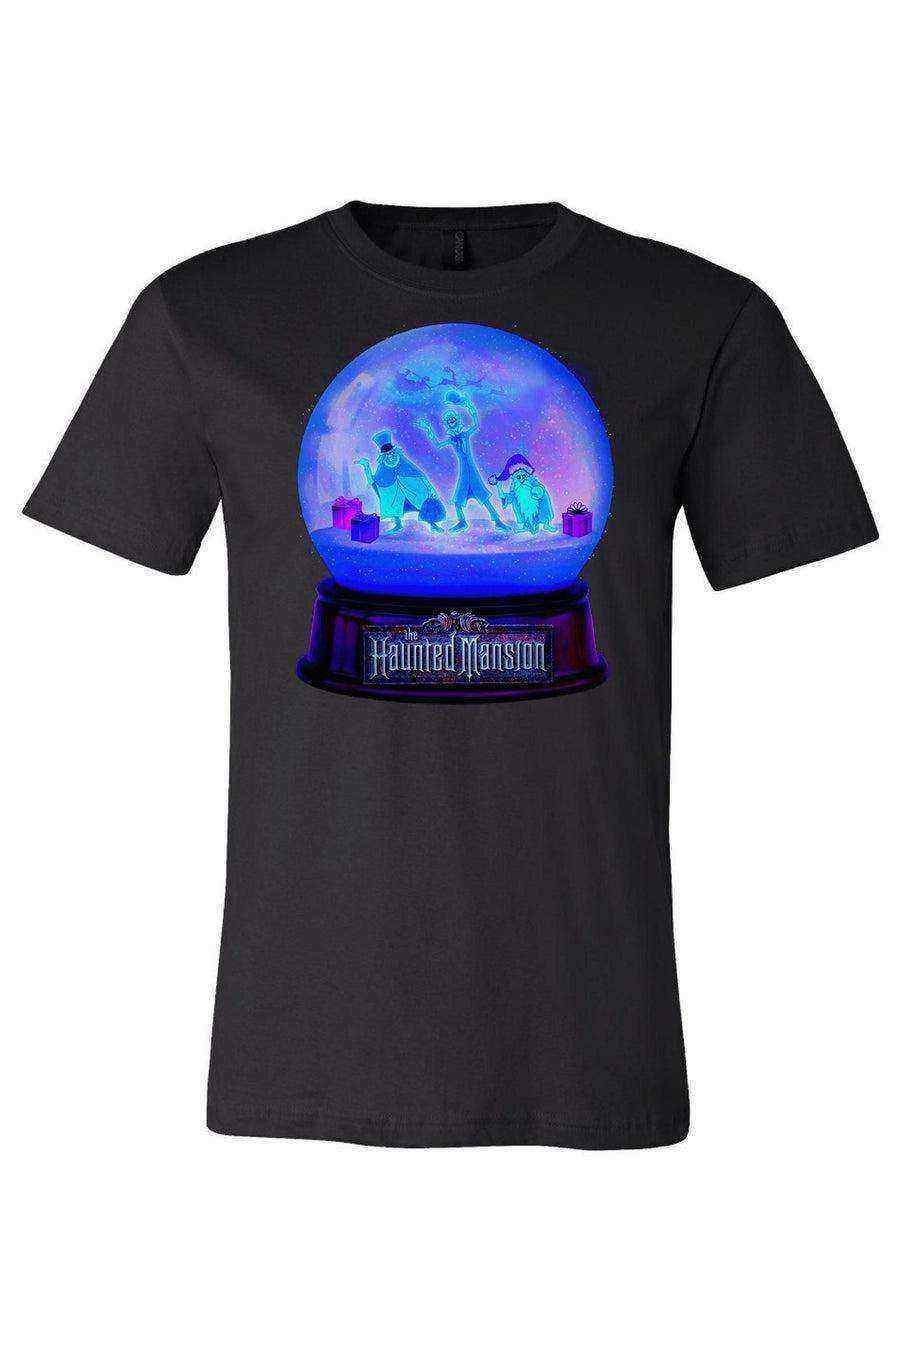 Youth | Haunted Mansion Holidays Tee | Hitchhiking Ghosts Tee - Dylan's Tees